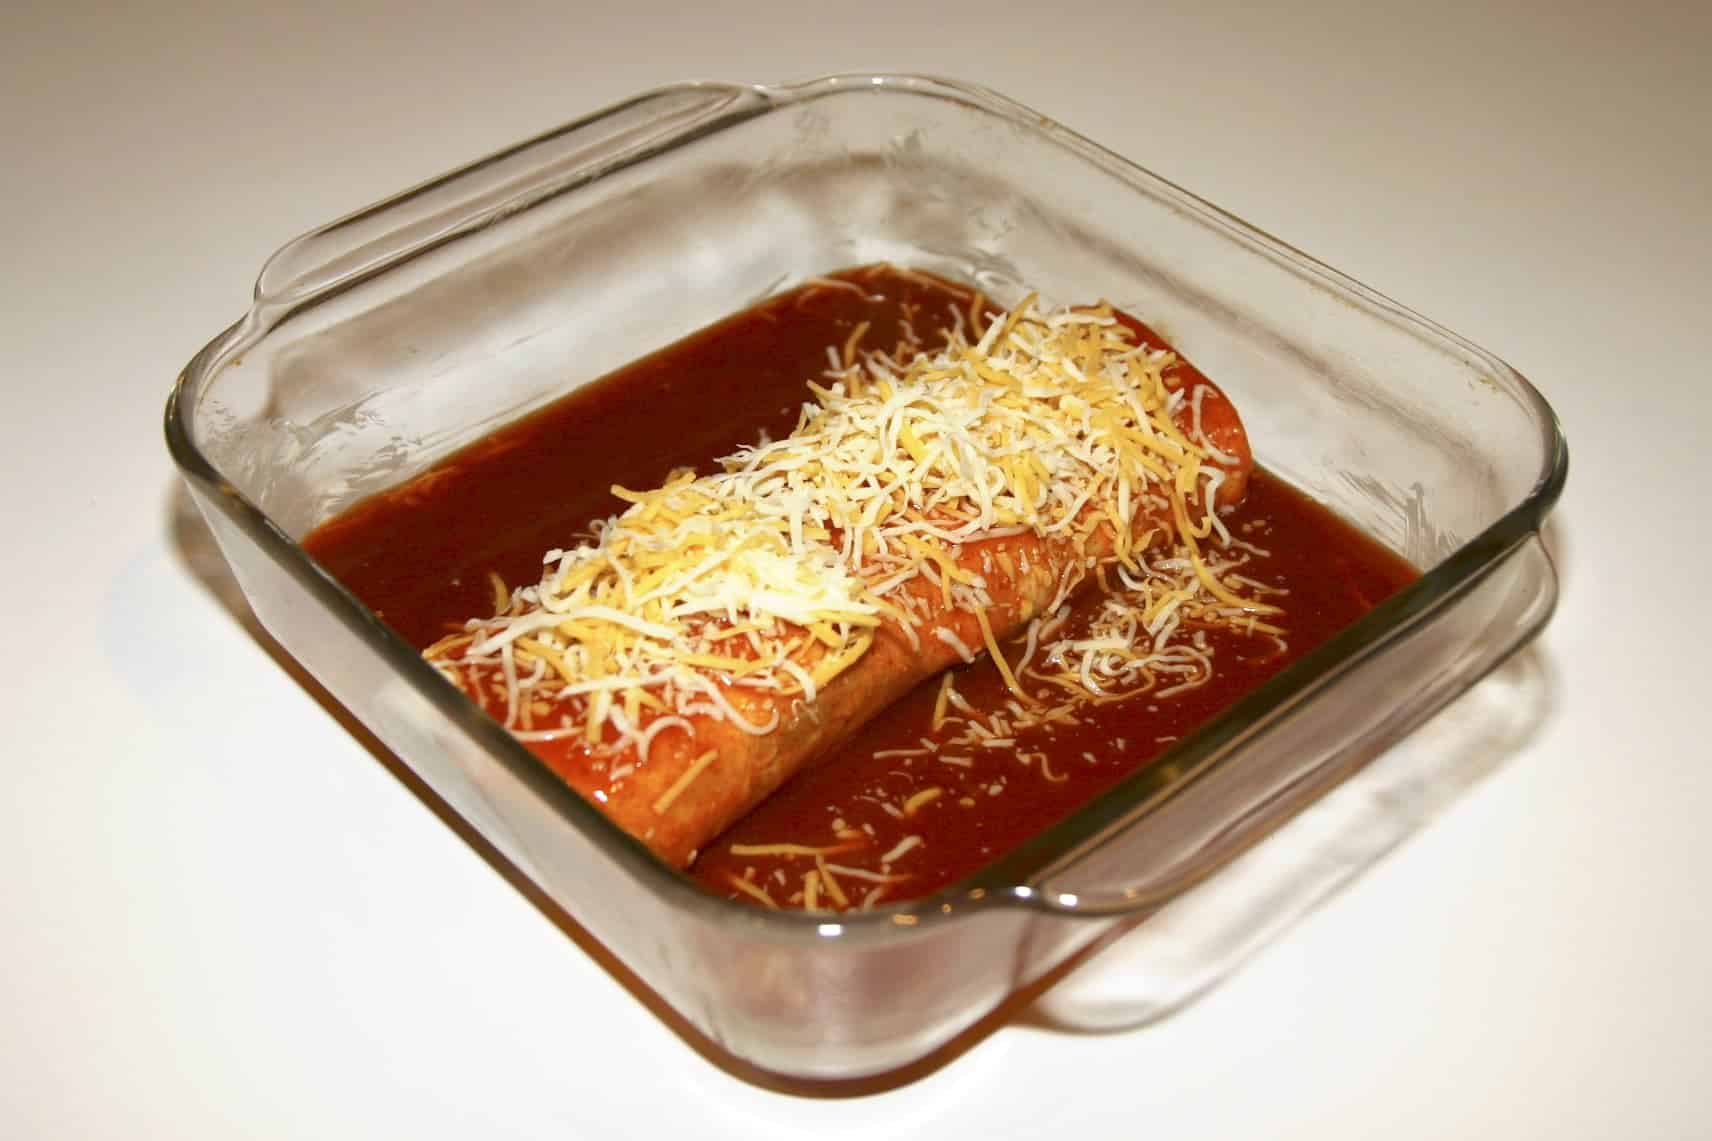 rolled tortilla in red enchilada sauce with shredded yellow and white cheese on top